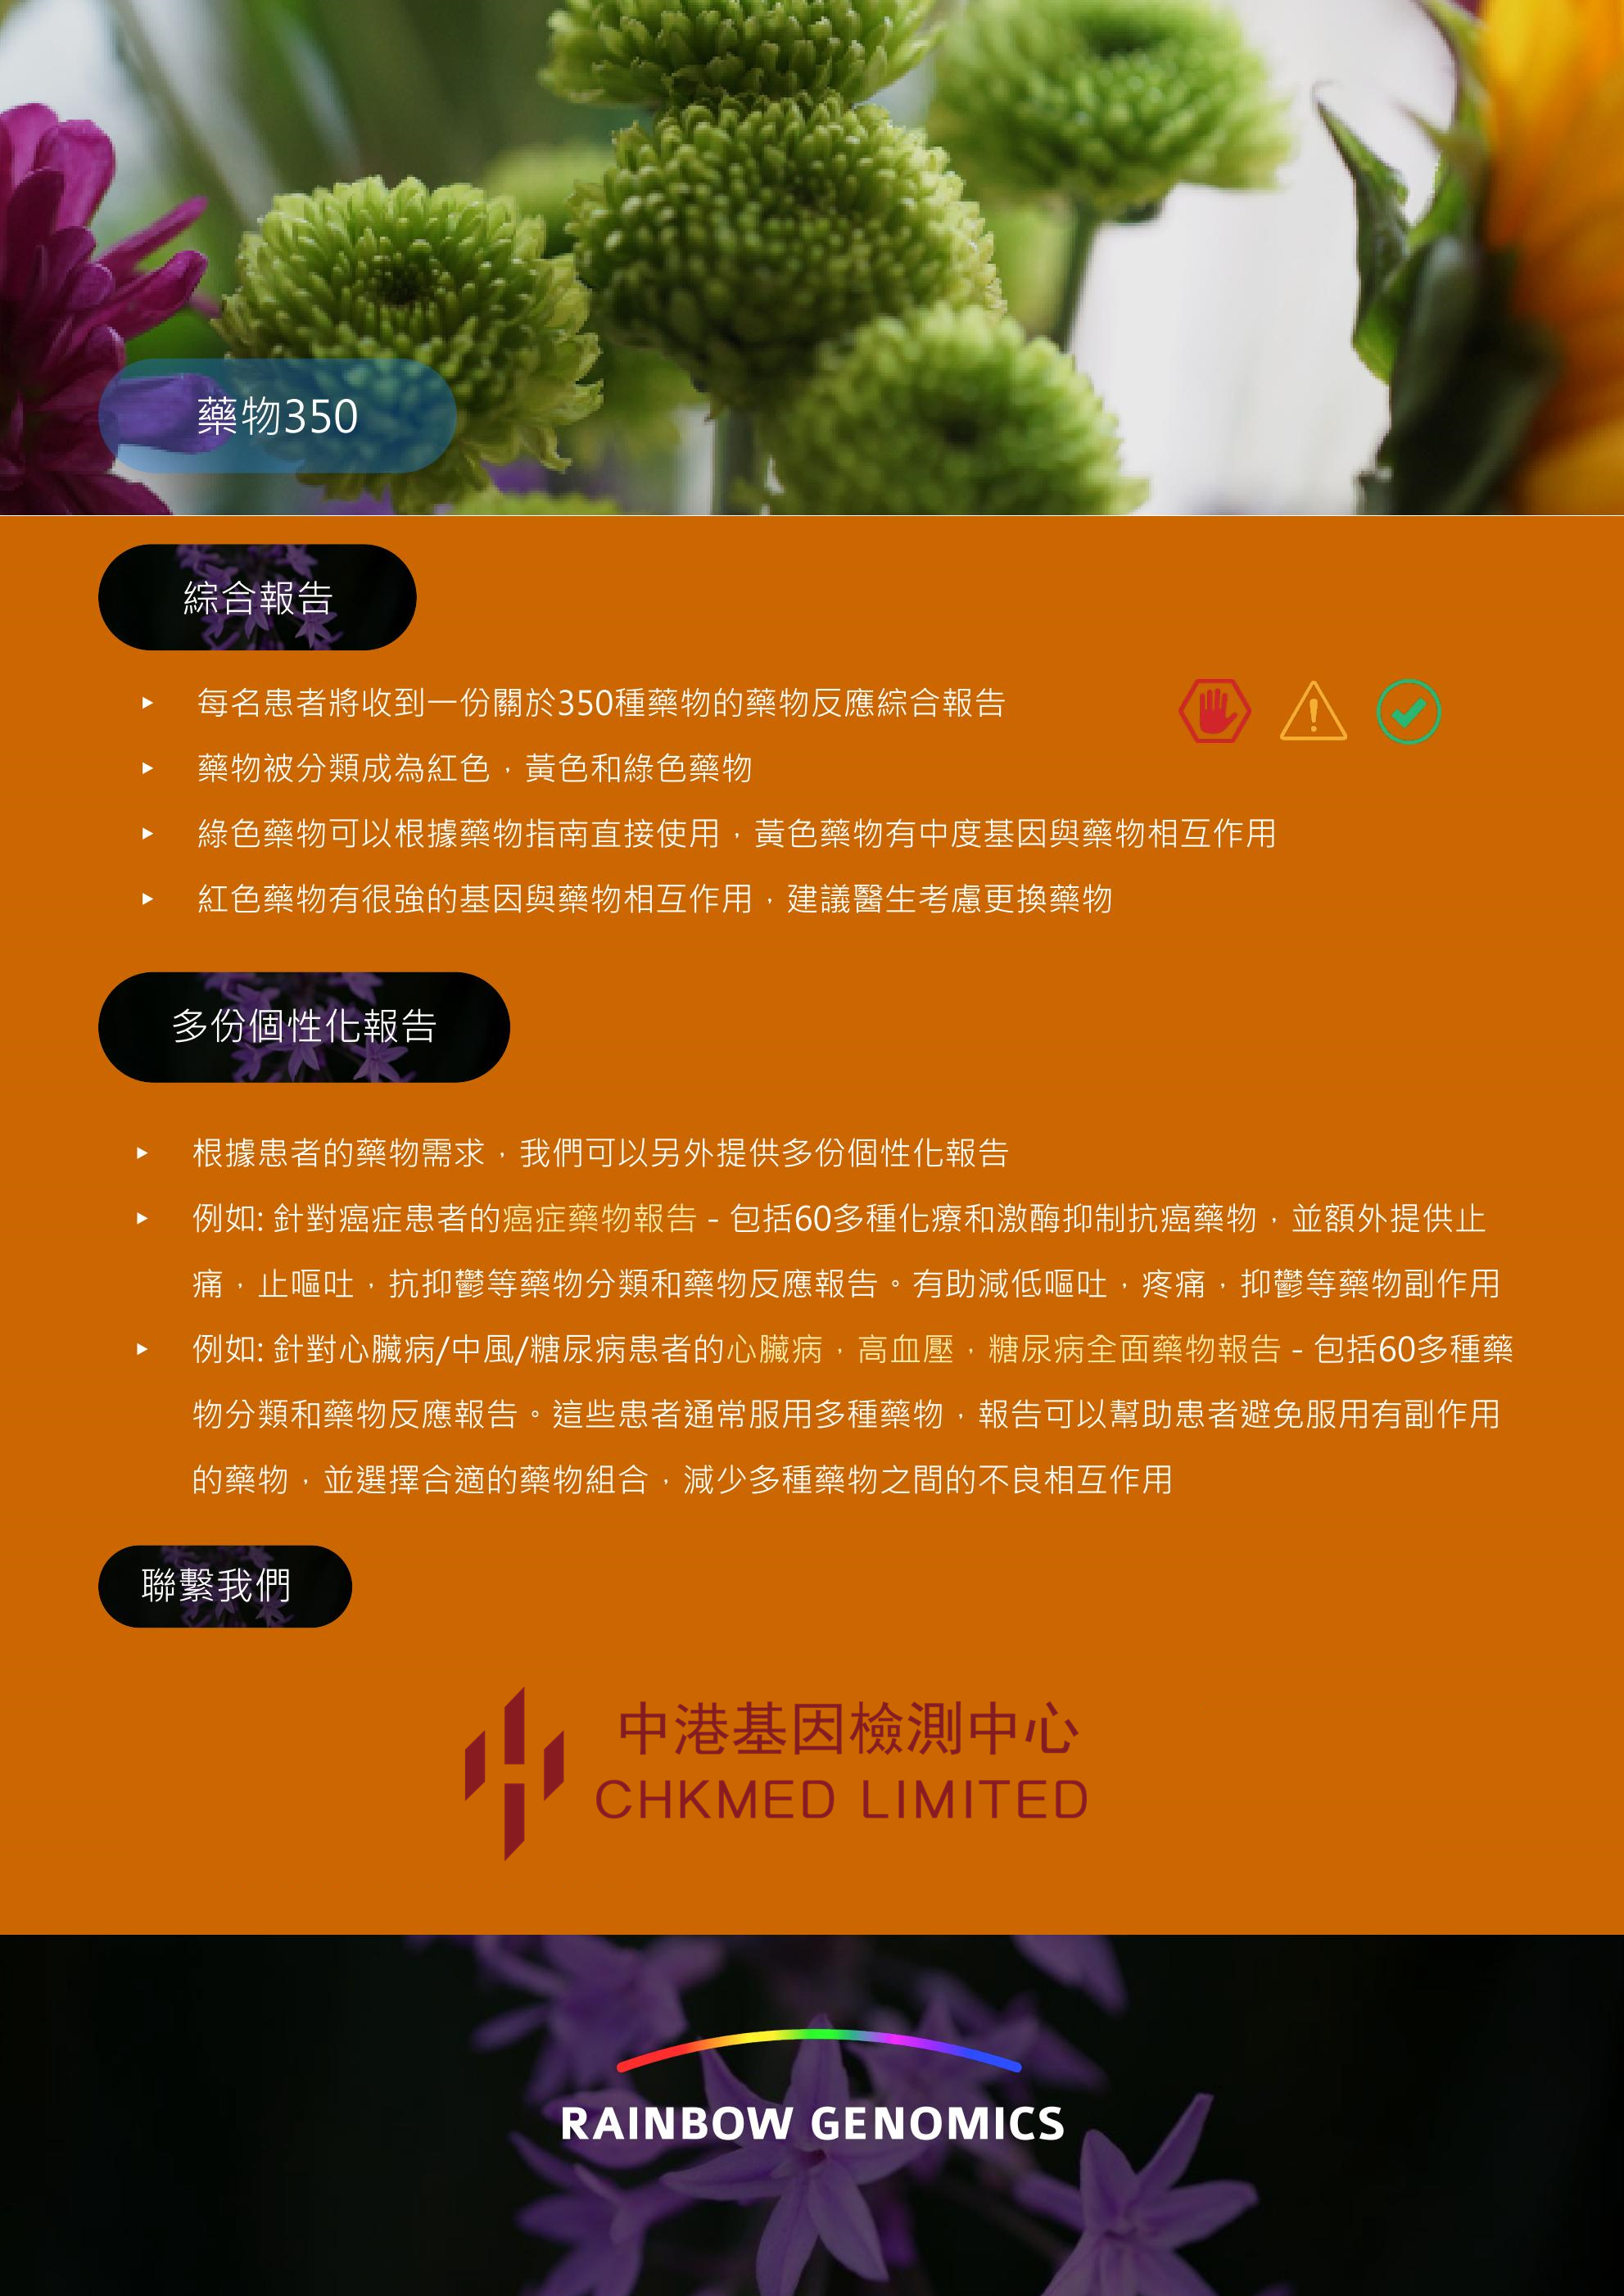 Oneome+Leaflet+Traditional+Chinese+A4+9-2-2018+Low+Res_01.jpg